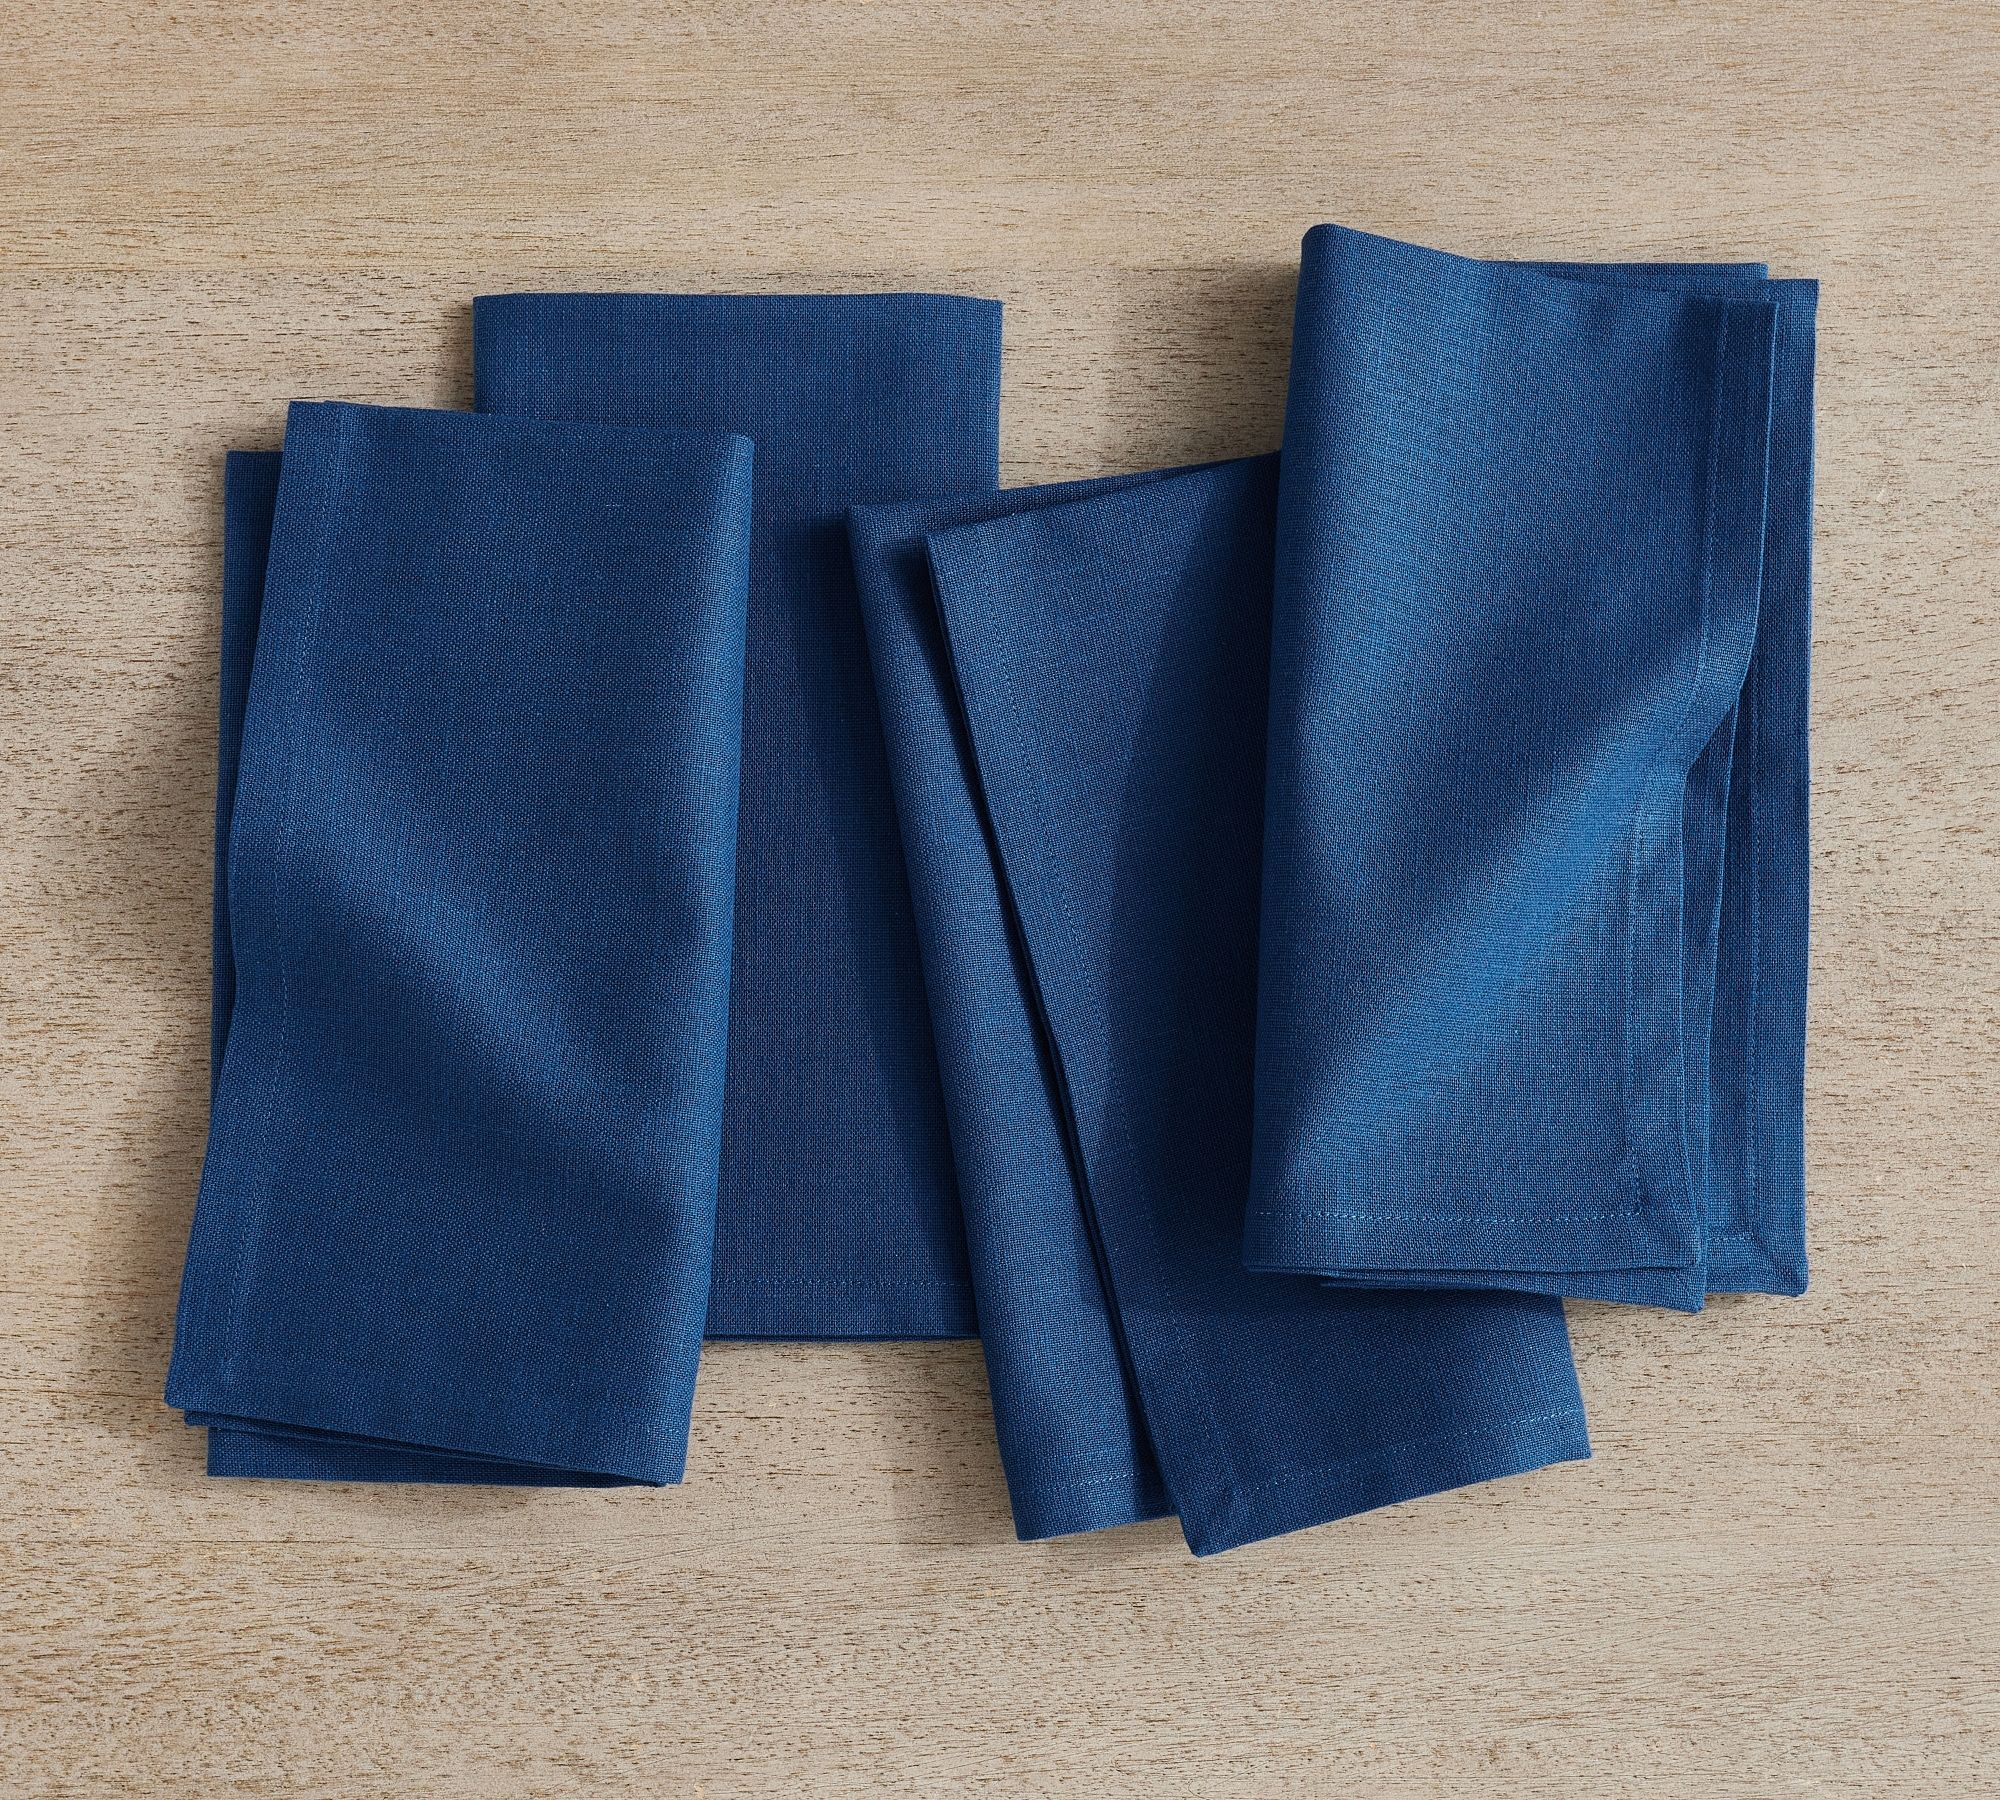 4-Pack Pottery Barn Everyday Organic Cotton Napkins (Navy) $10.20 + Free Shipping